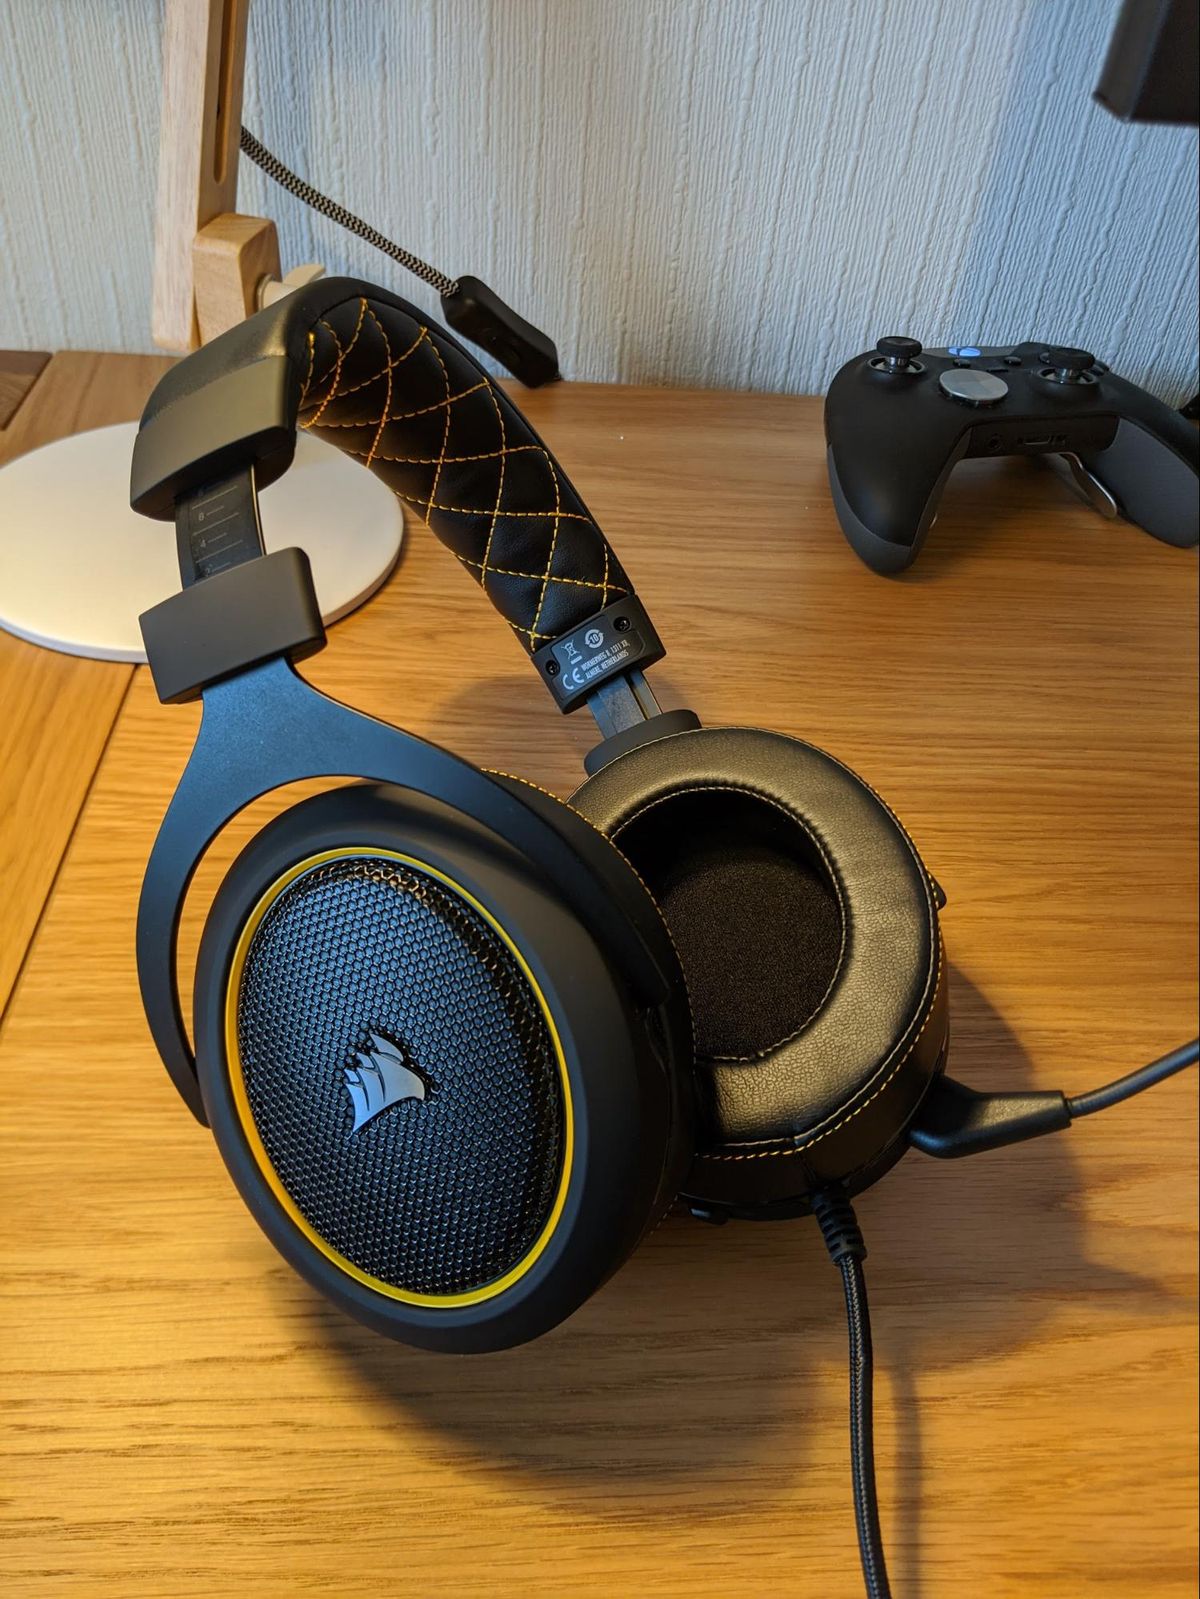 corsair headset wired